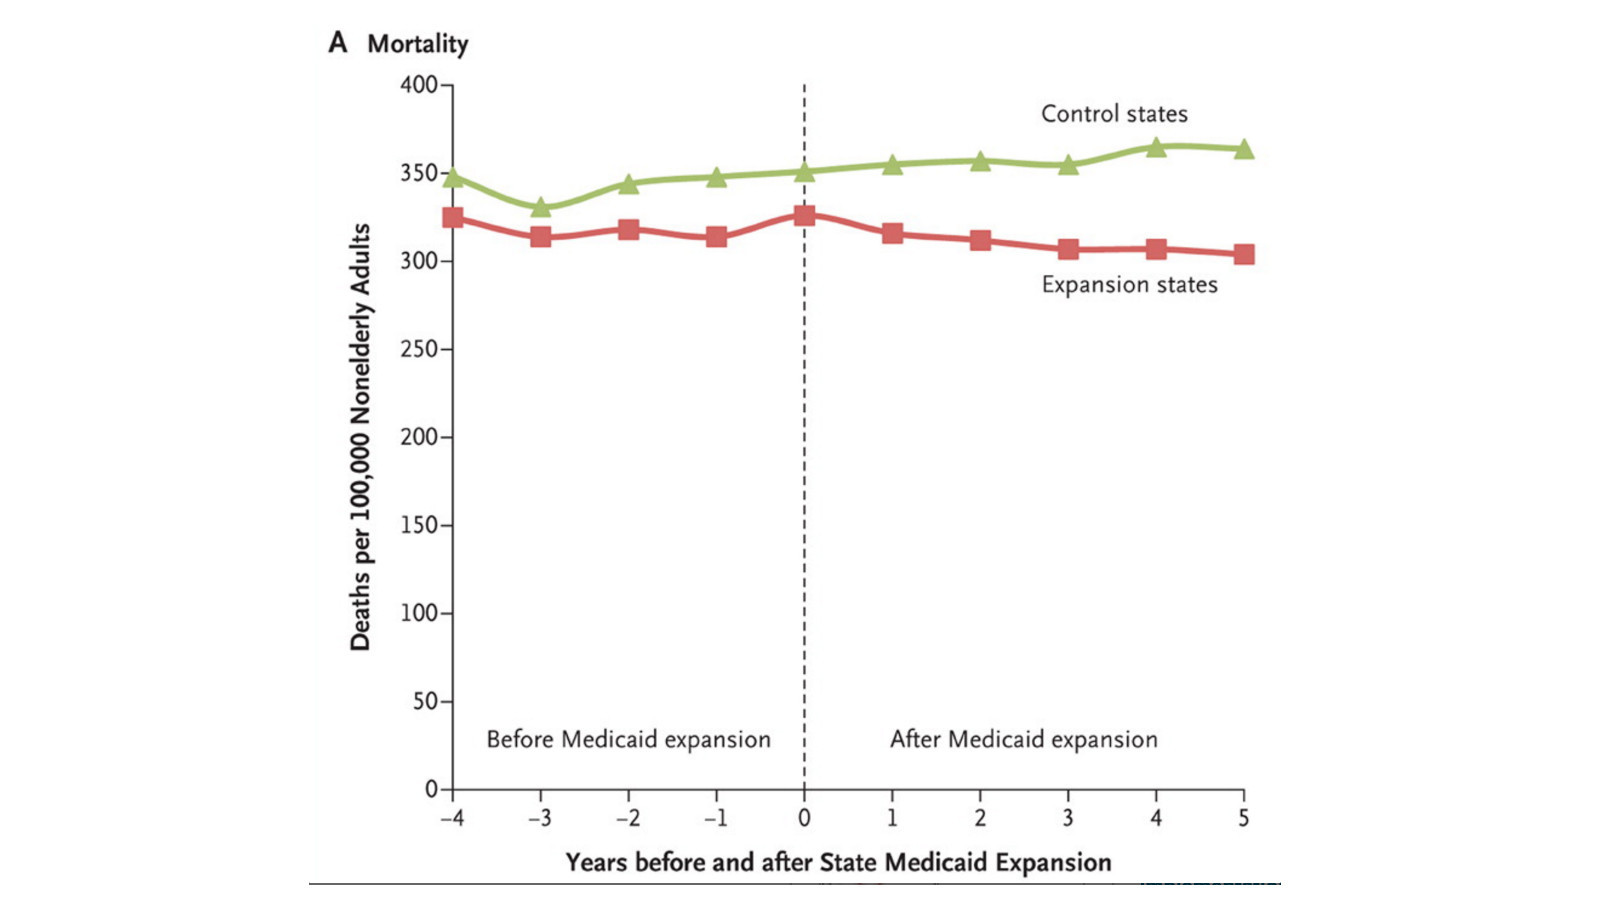 Mortality rates fell appreciably in Medicaid expansion states under the ACA, compared to states that rejected the expansion.